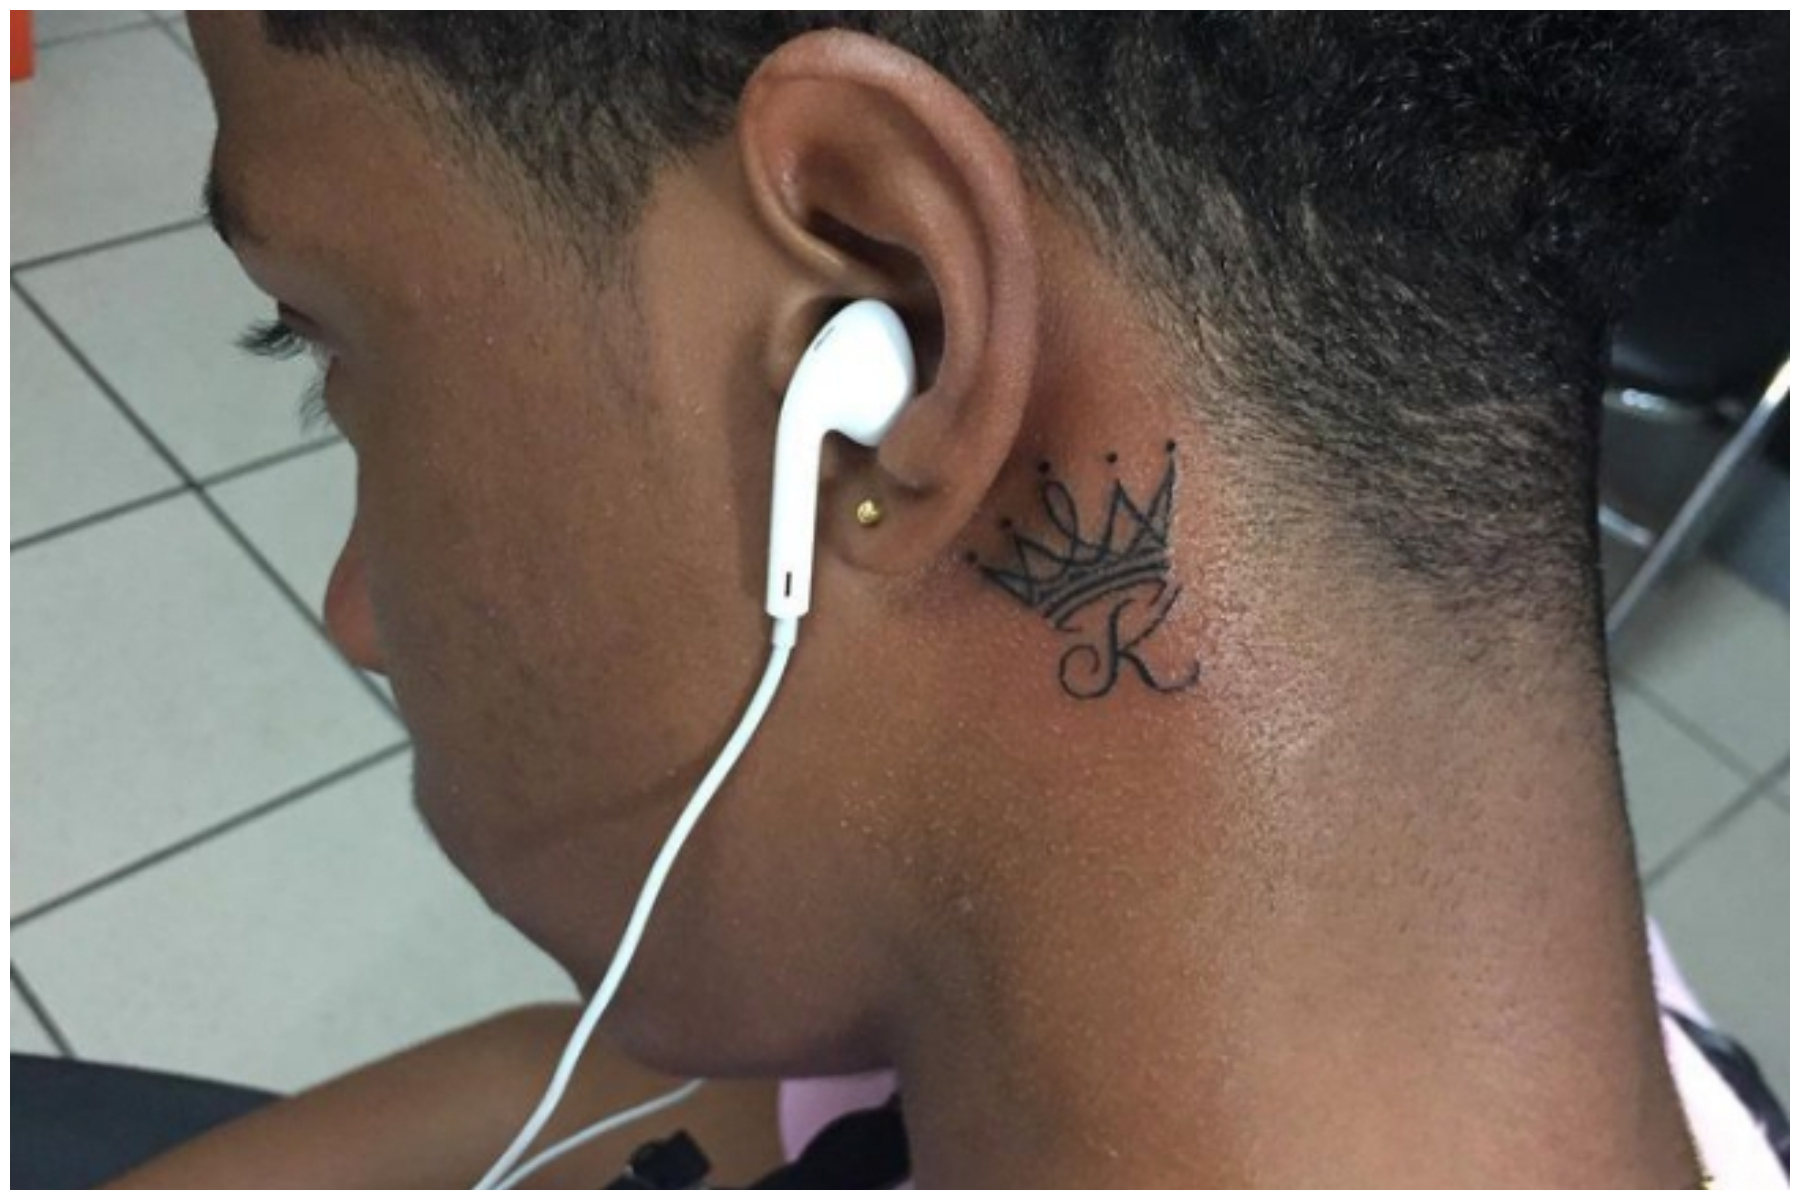 Ink'dom Tattoos - Small , simple yet eye-catching neck... | Facebook